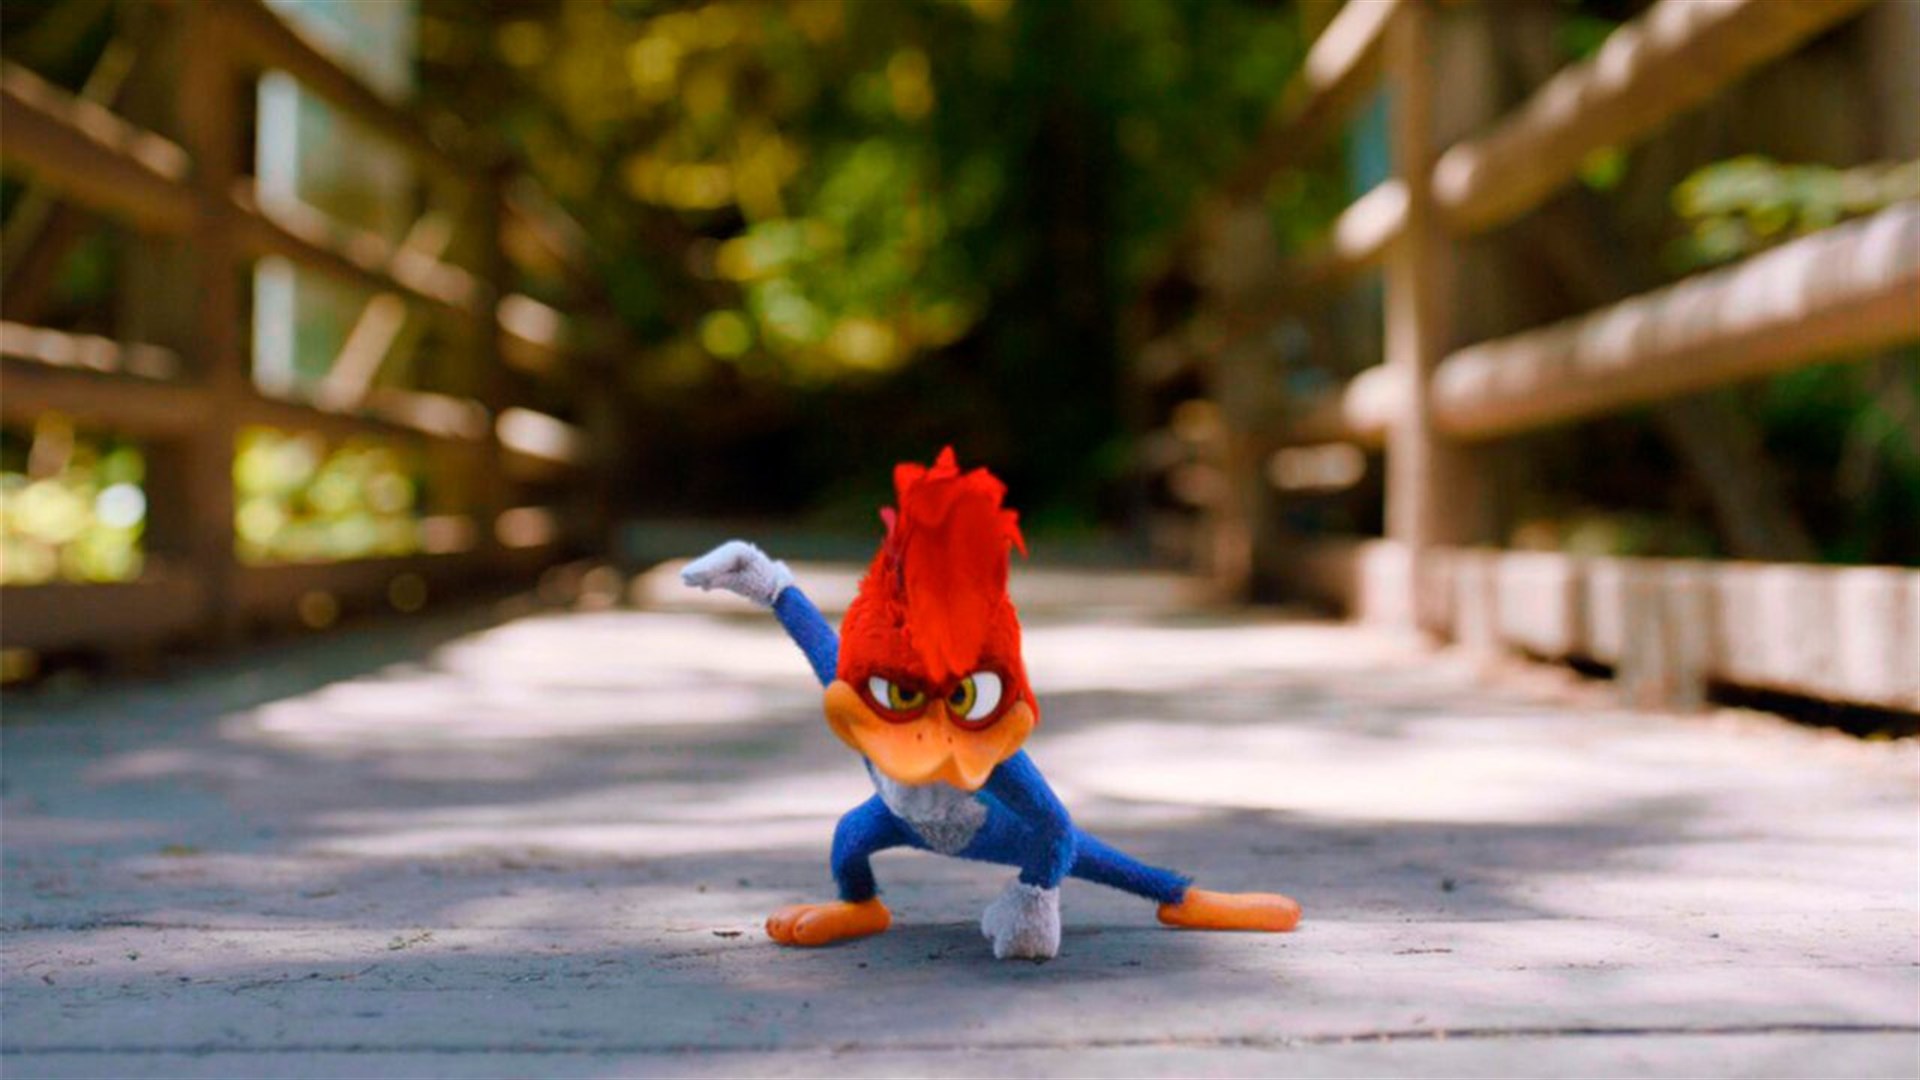 Woody Woodpecker: Director Alex Zamm On His Approach To Bringing This Icon Figure To Life (Exclusive Interview)